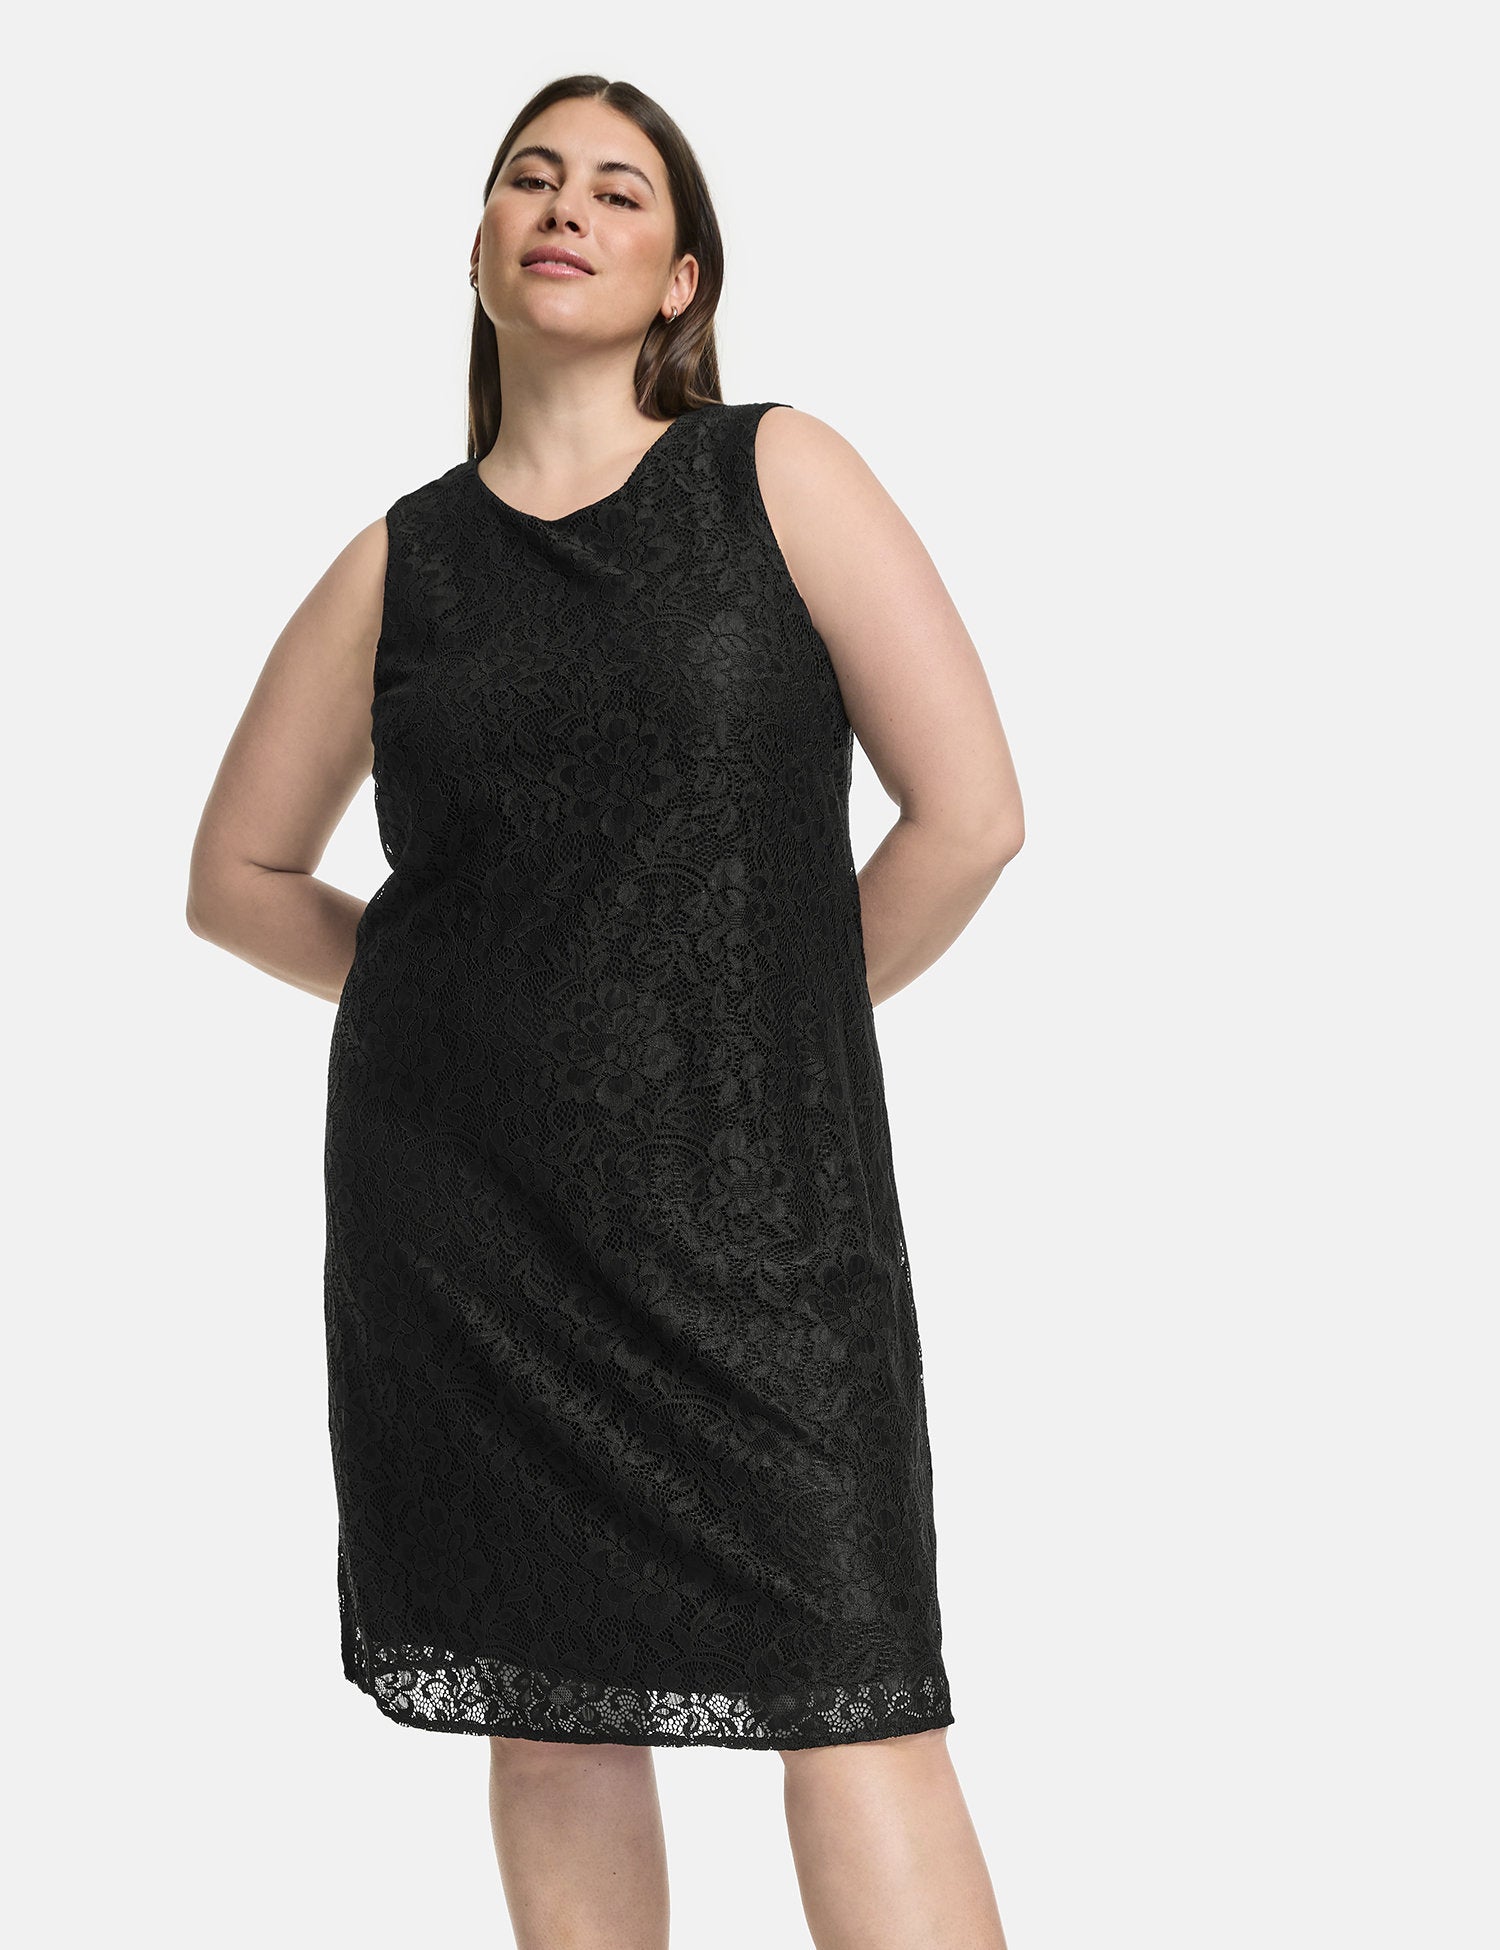 Sleeveless Lace Dress With Stretch For Comfort_480016-21056_1100_04